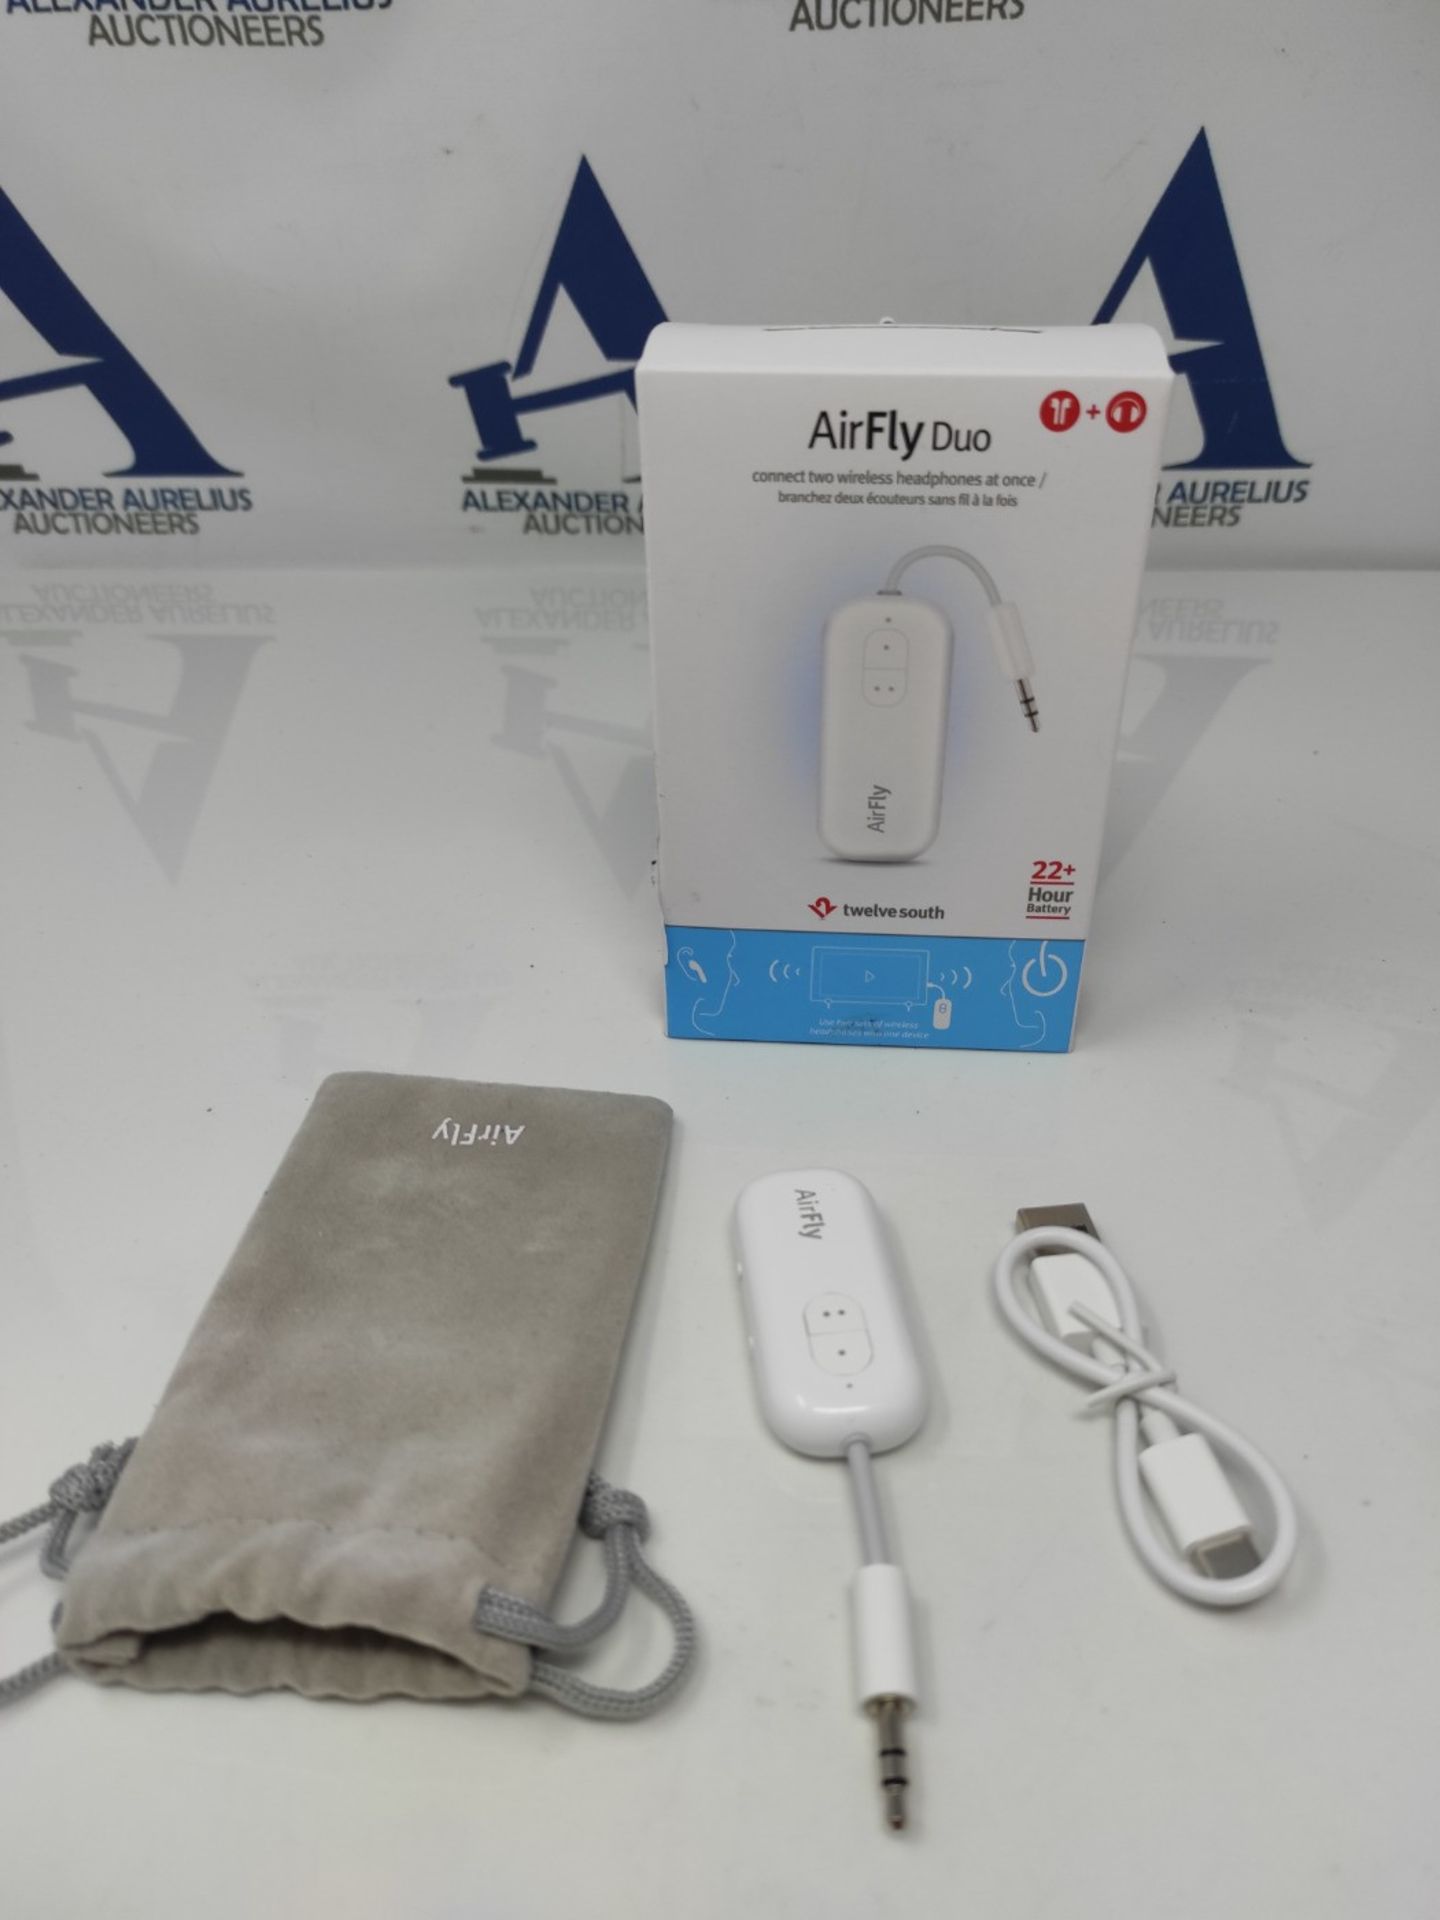 Twelve South AirFly Duo | Wireless transmitter with audio sharing for up to 2 AirPods - Image 2 of 2